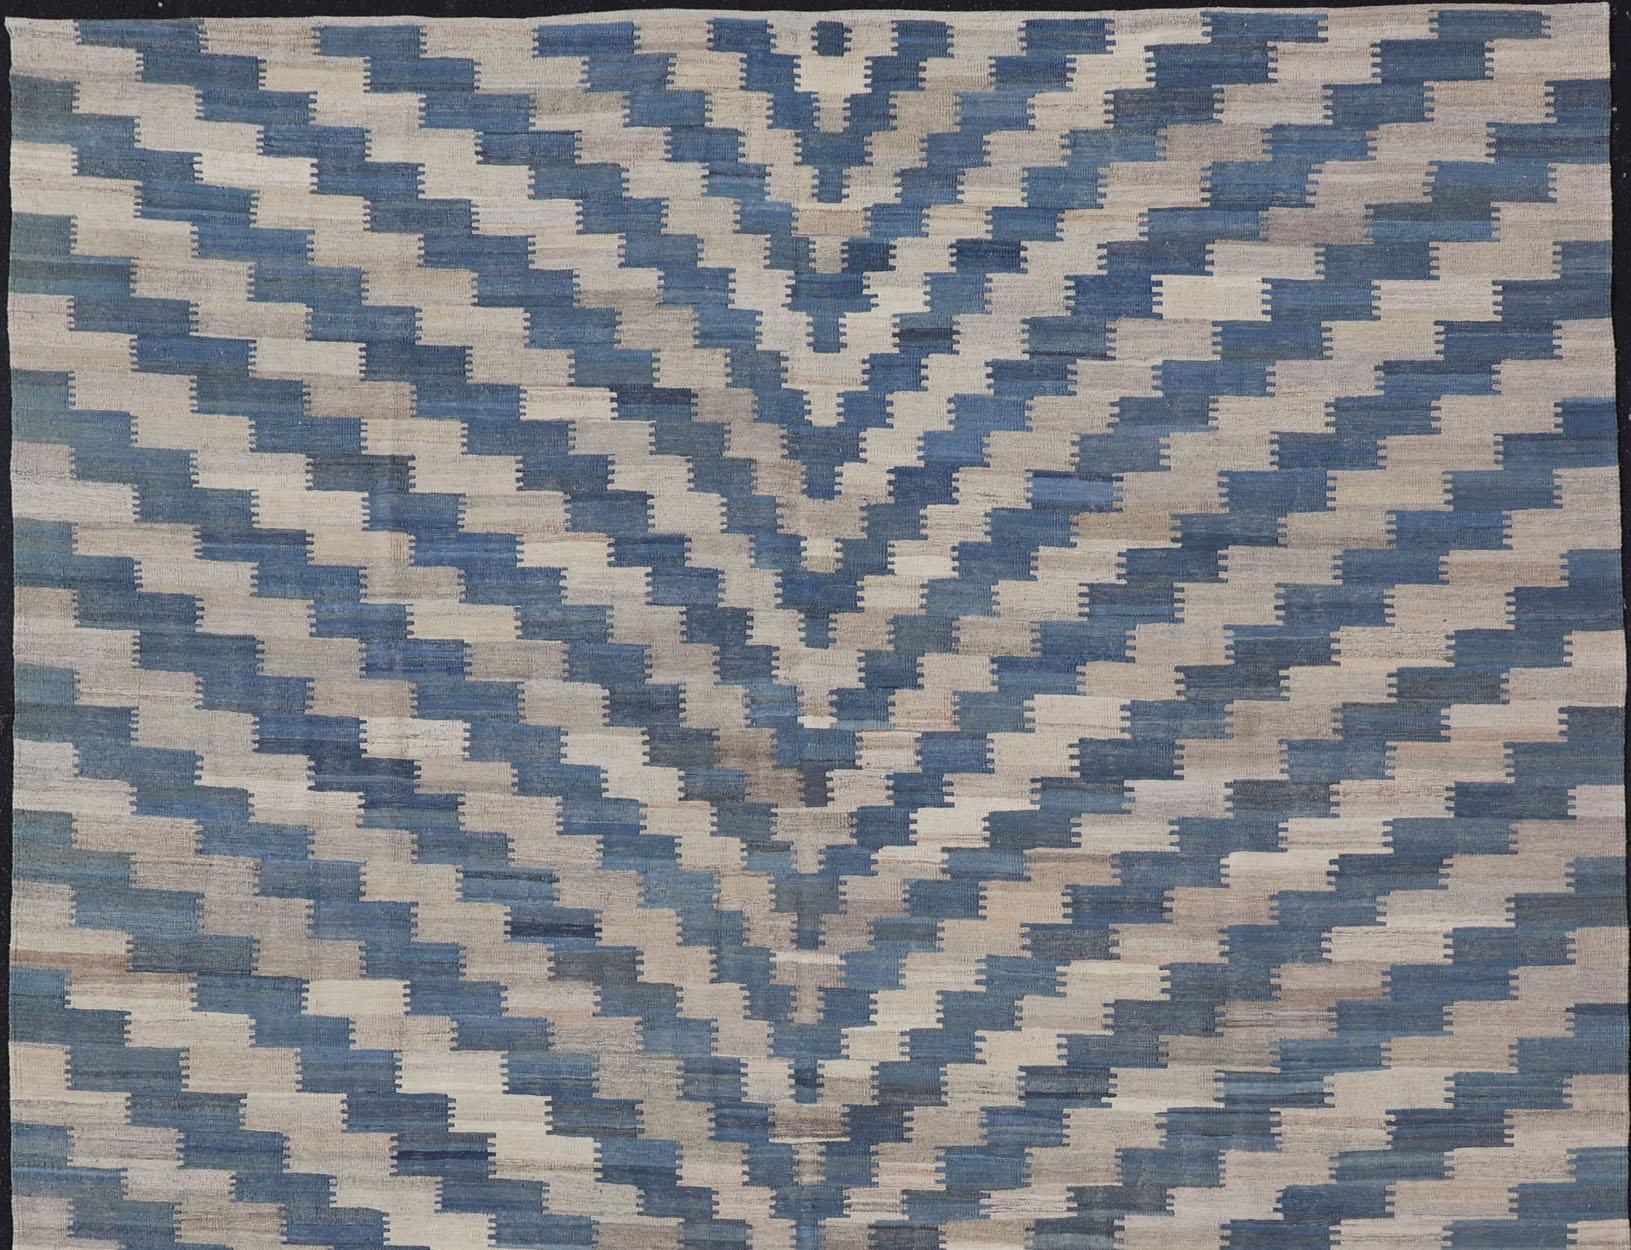 Modern flat-weave Kilim rug with stripes in shades of light blue, blues, and creams, Keivan Woven Arts / rug AFG-88, country of origin / type: Afghanistan / Kilim

This flat-woven Kilim rug features a modern design that places seamlessly in any